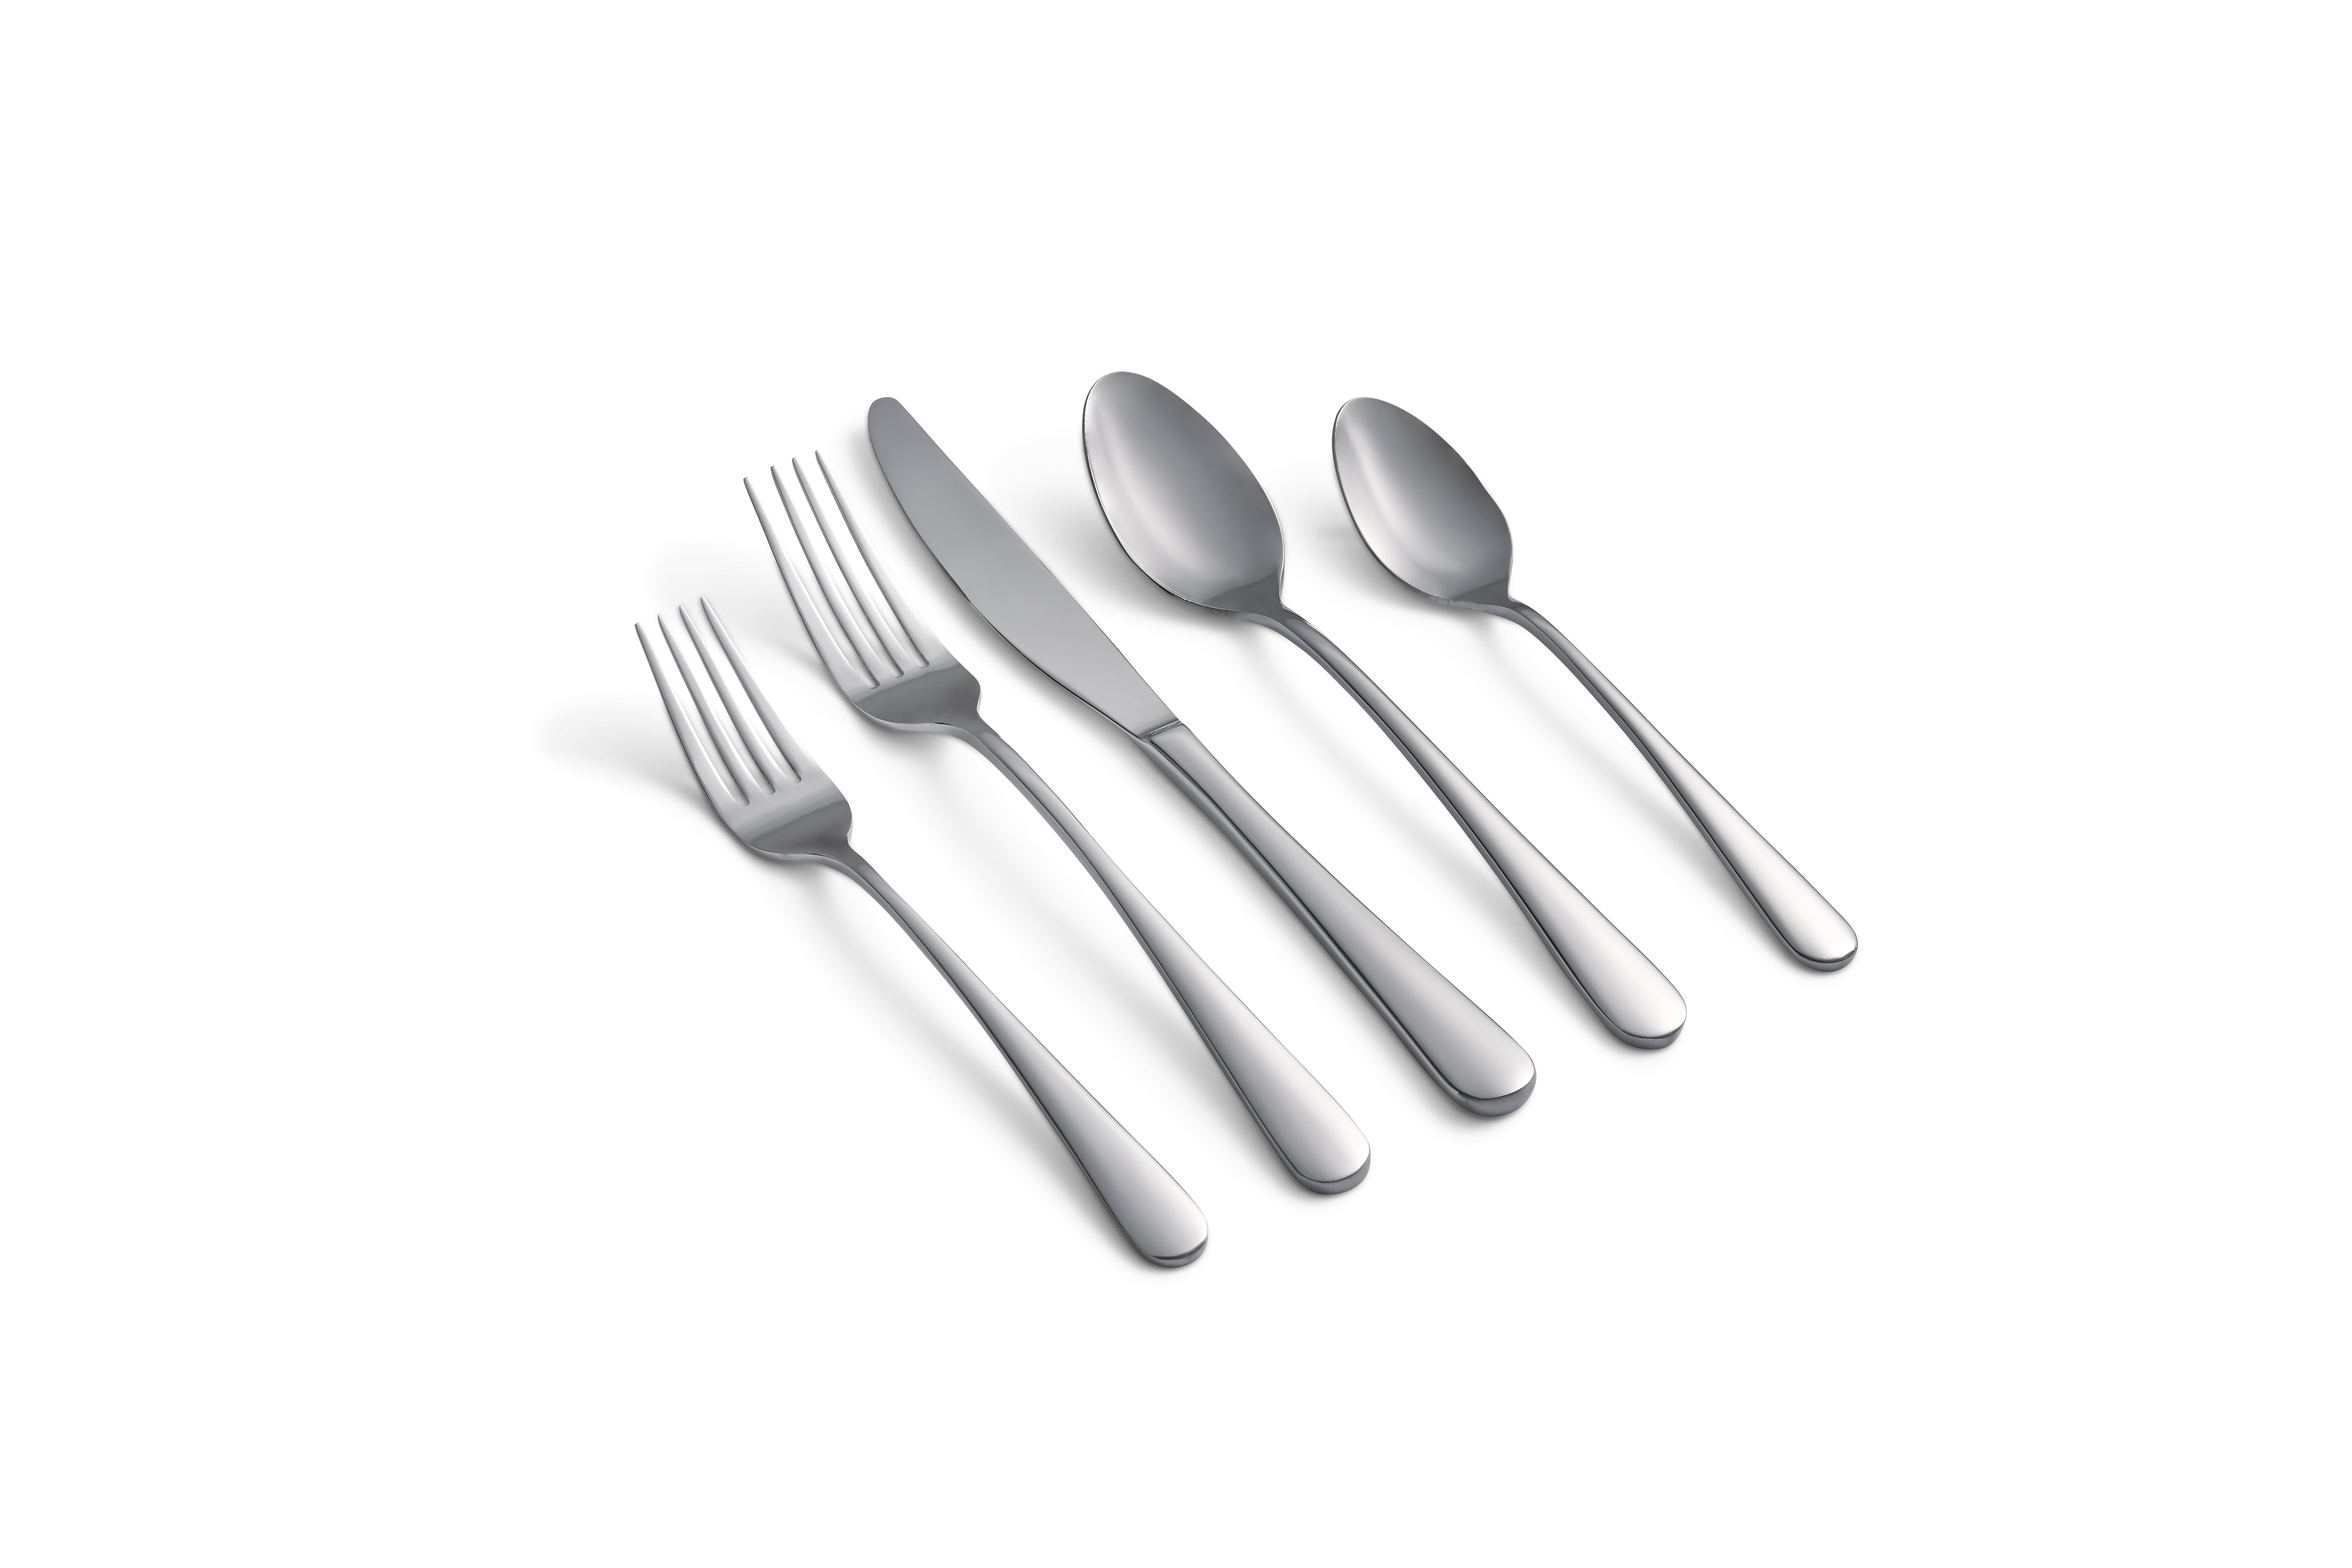 Garden Of Arts Premium Quality Stainless Steel Fork Set of 6